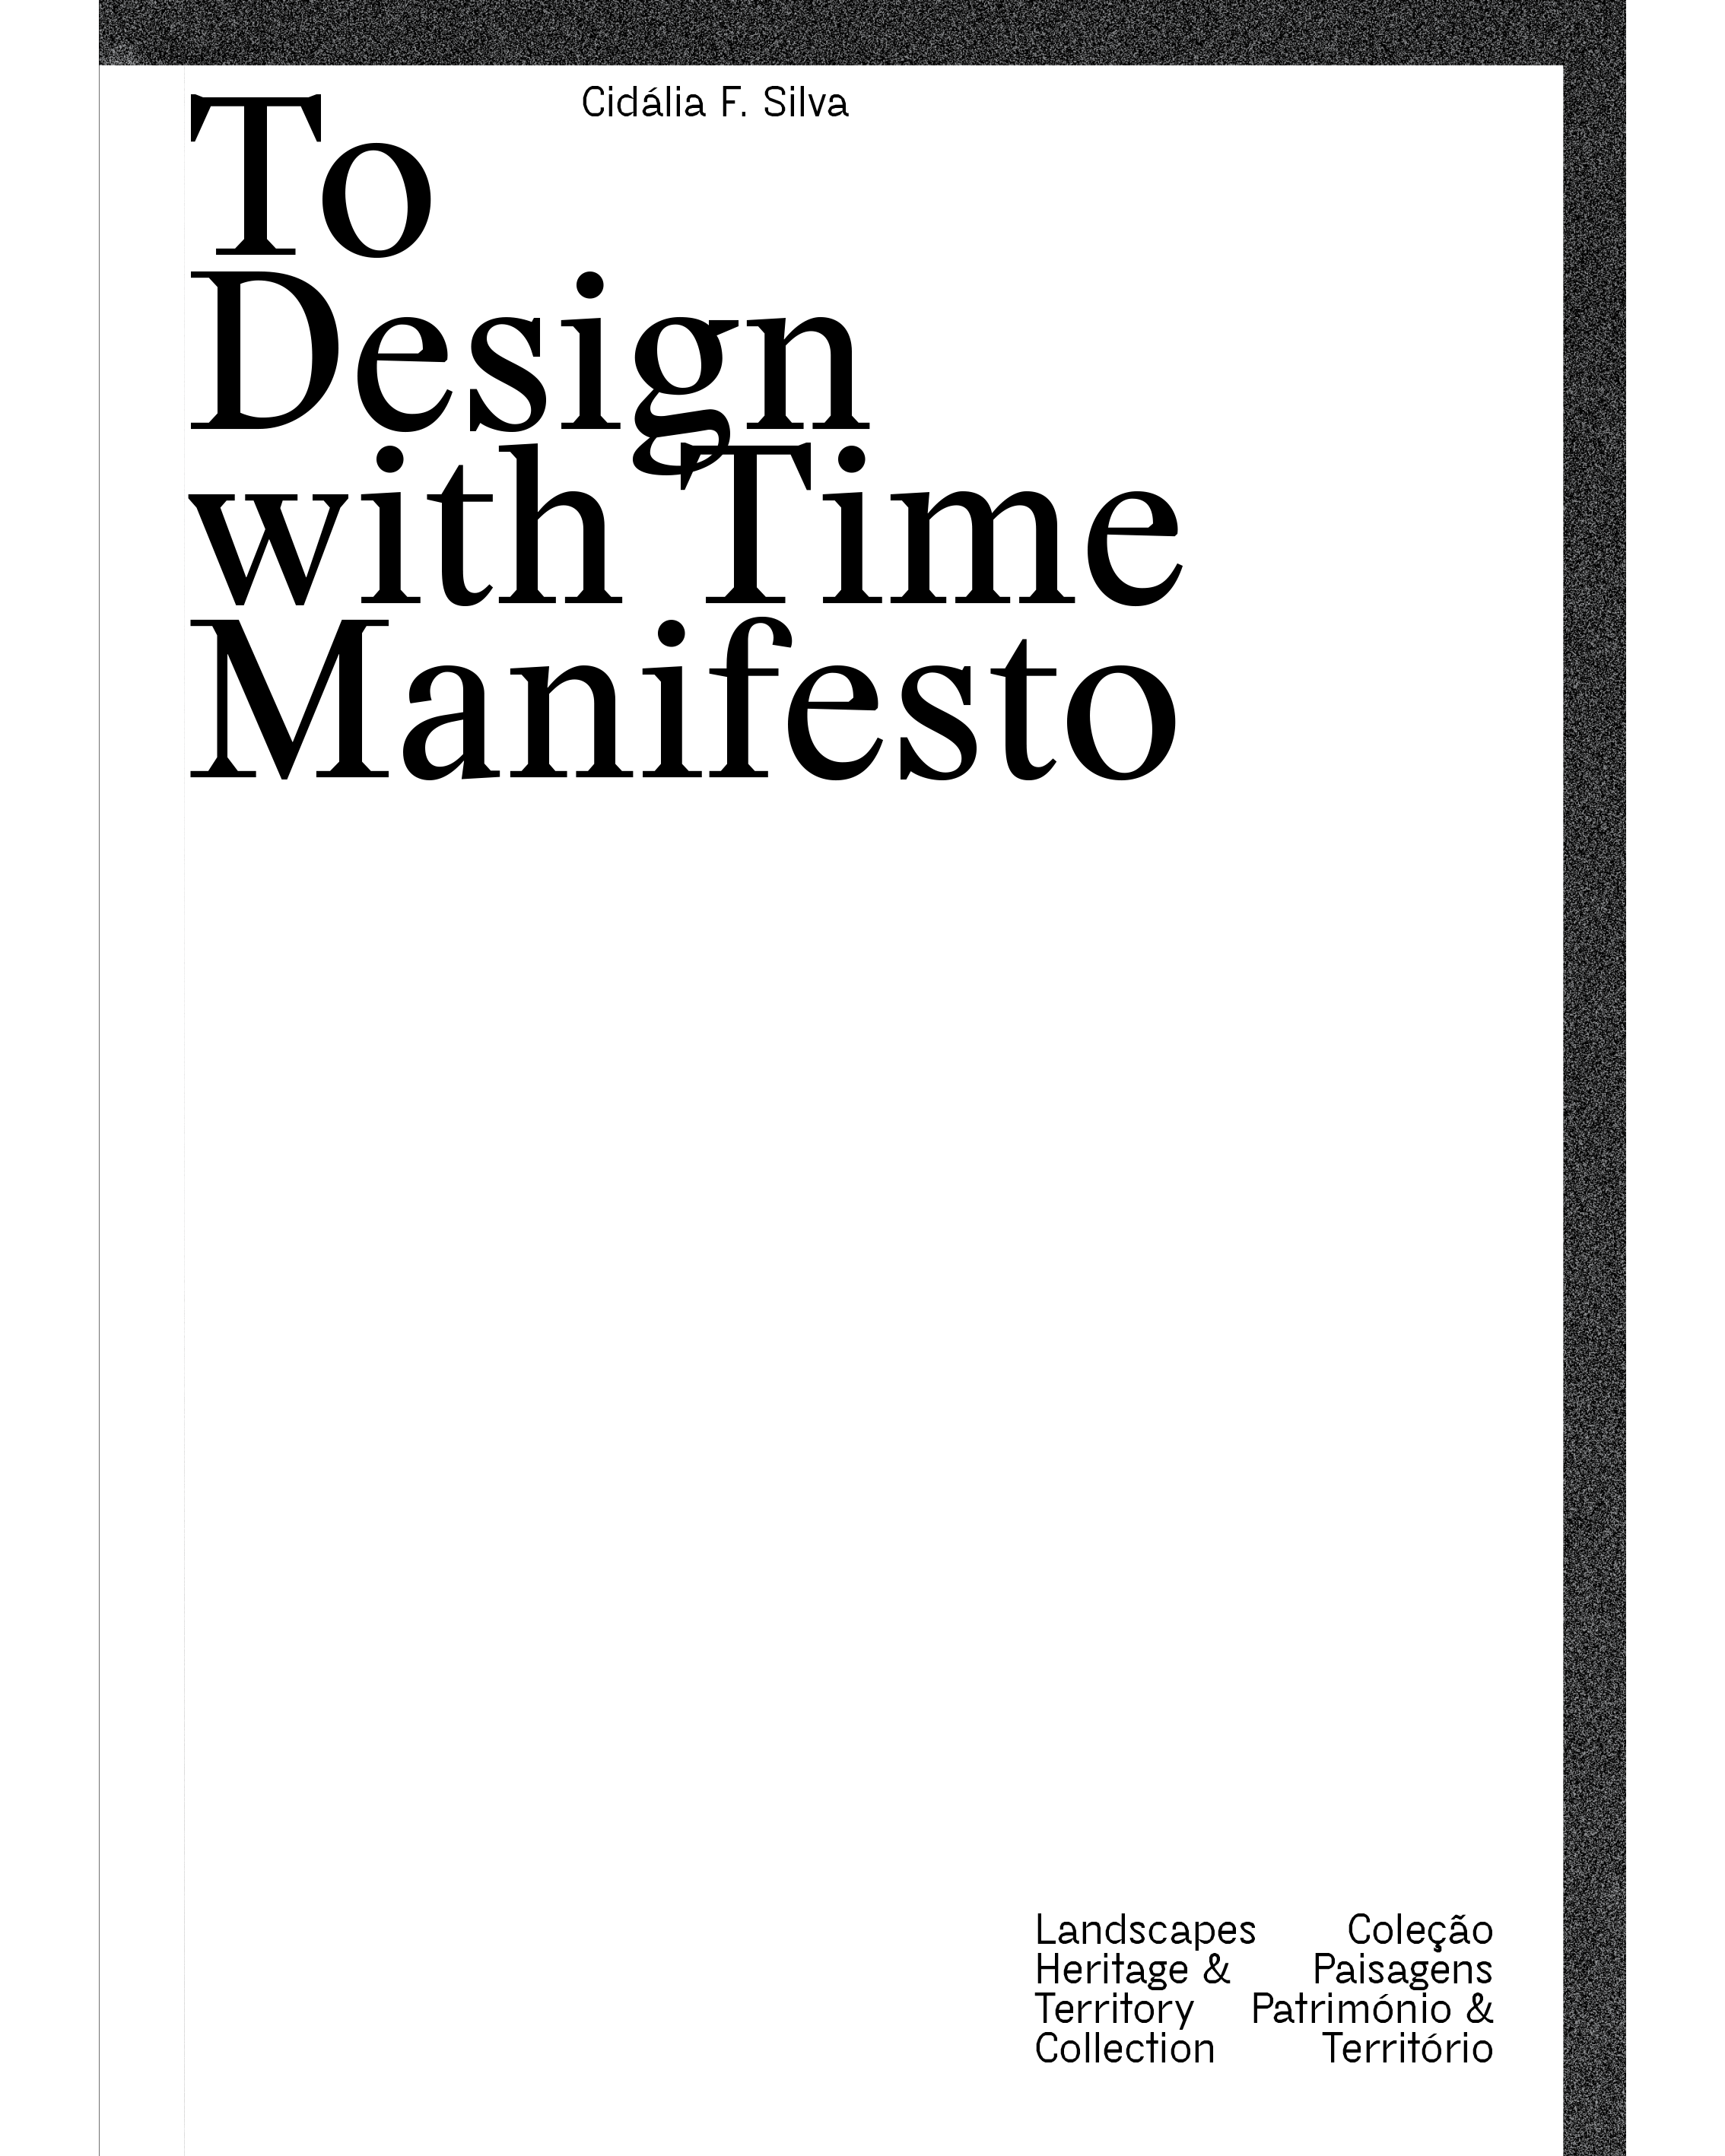 2018 - To Design with Time Manifesto image